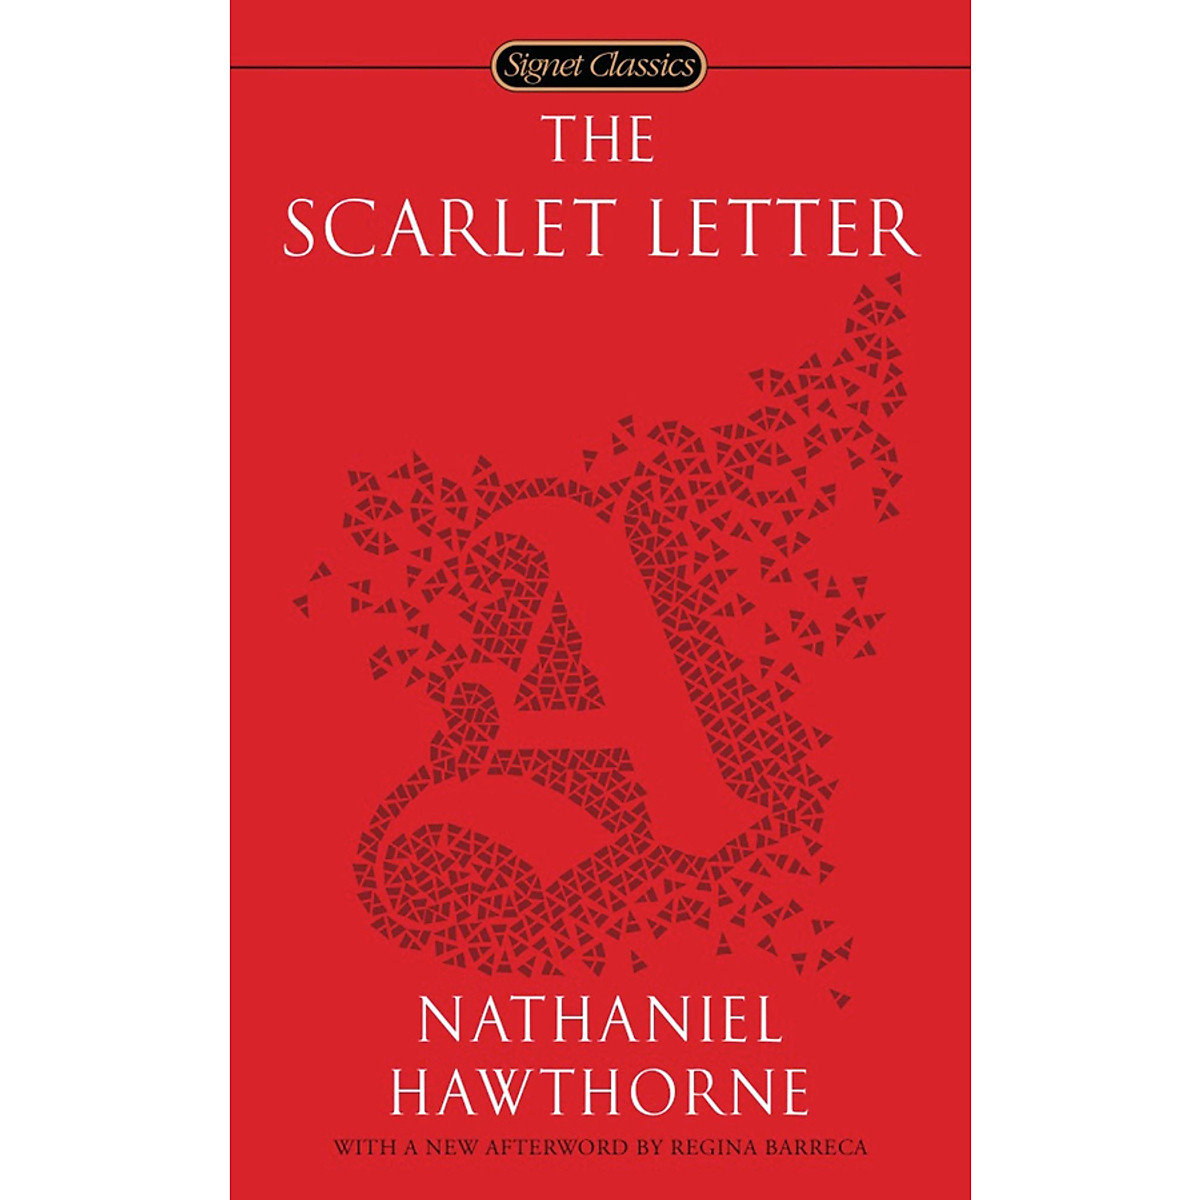 Signet Classics: The Scarlet Letter (With a New Afterword by Regina Barreca)